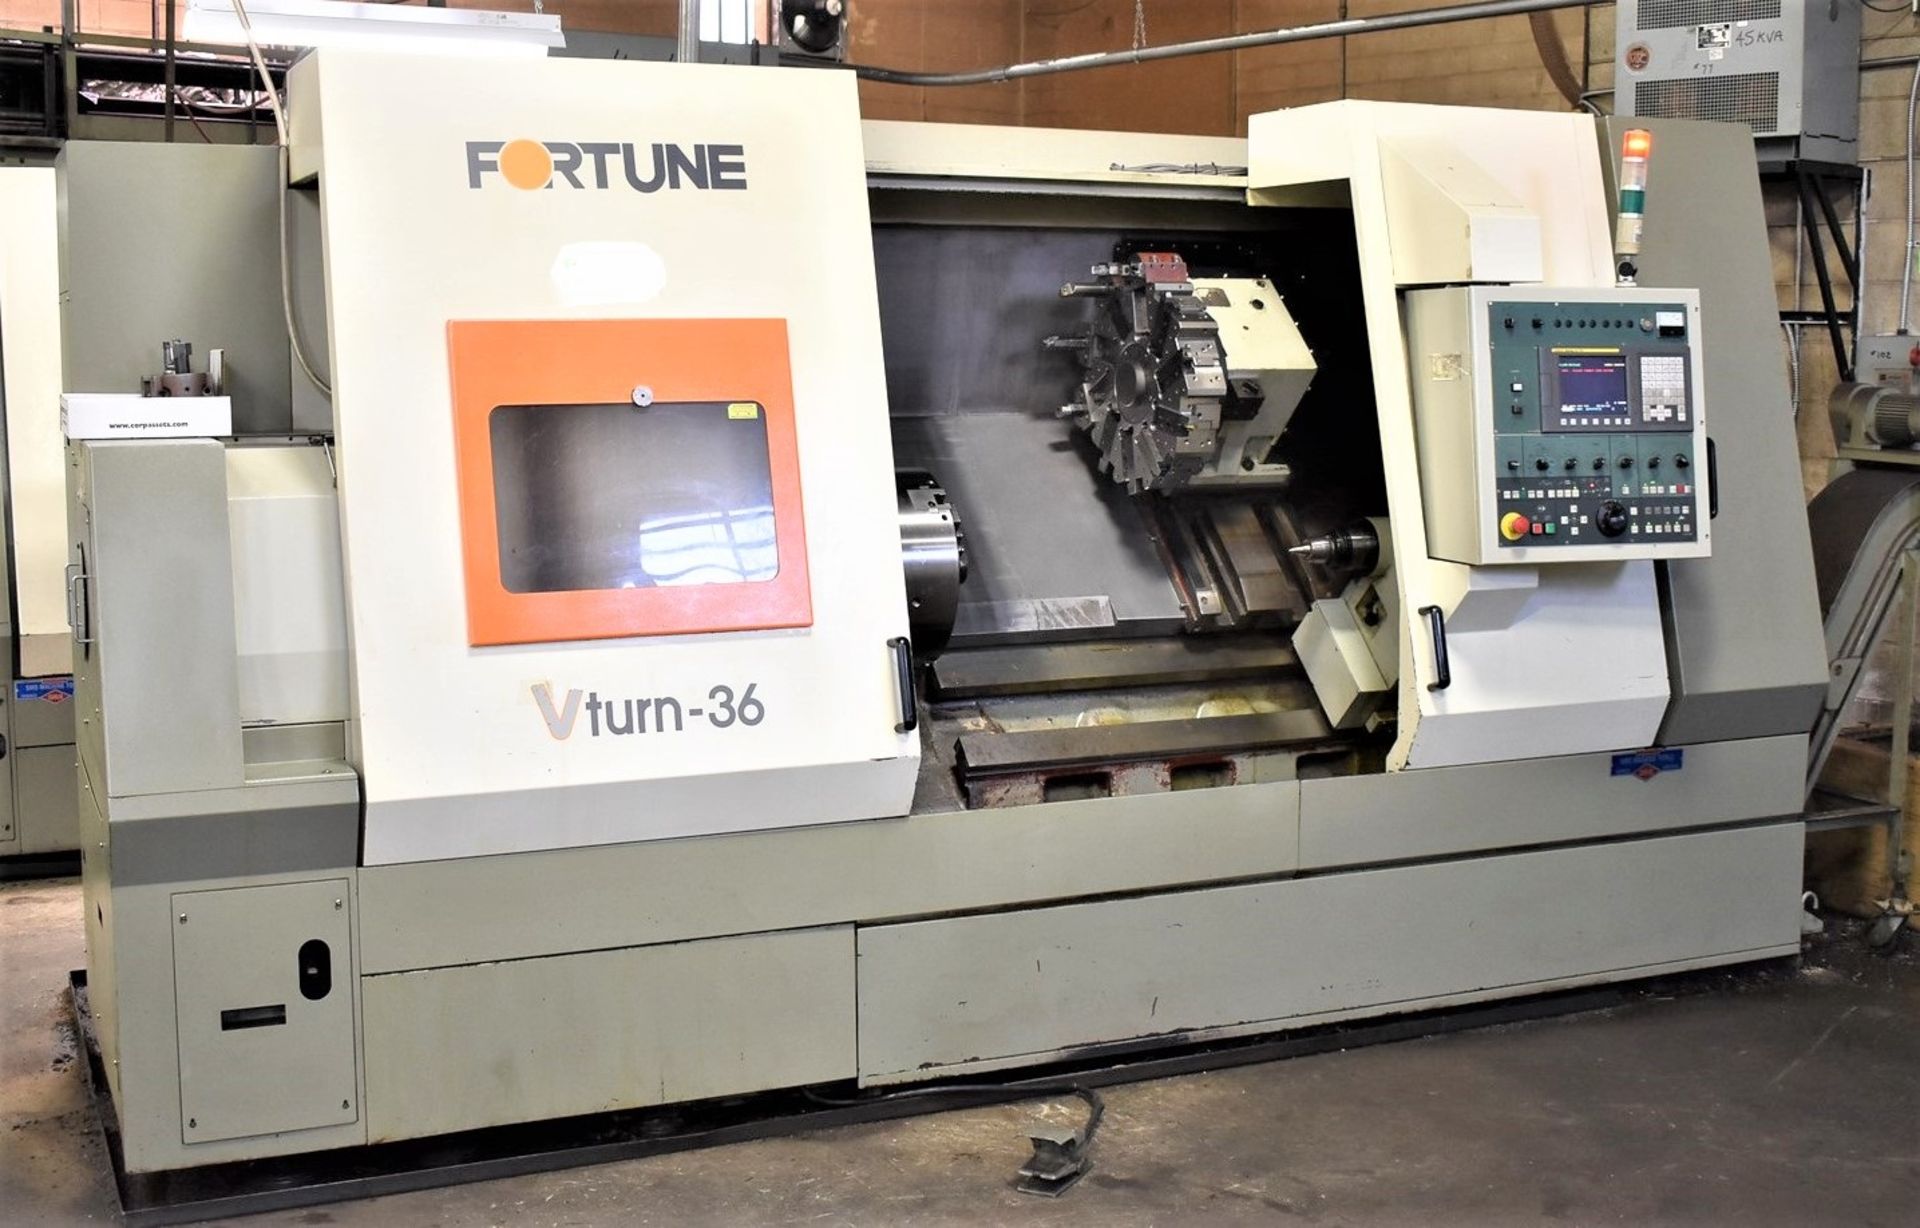 21.65"x35" Victor (Fortune) Mdl VTURN-36 2-Axis CNC Turning Center Lathe, S/N MD-1636, New 2007 - Image 10 of 10